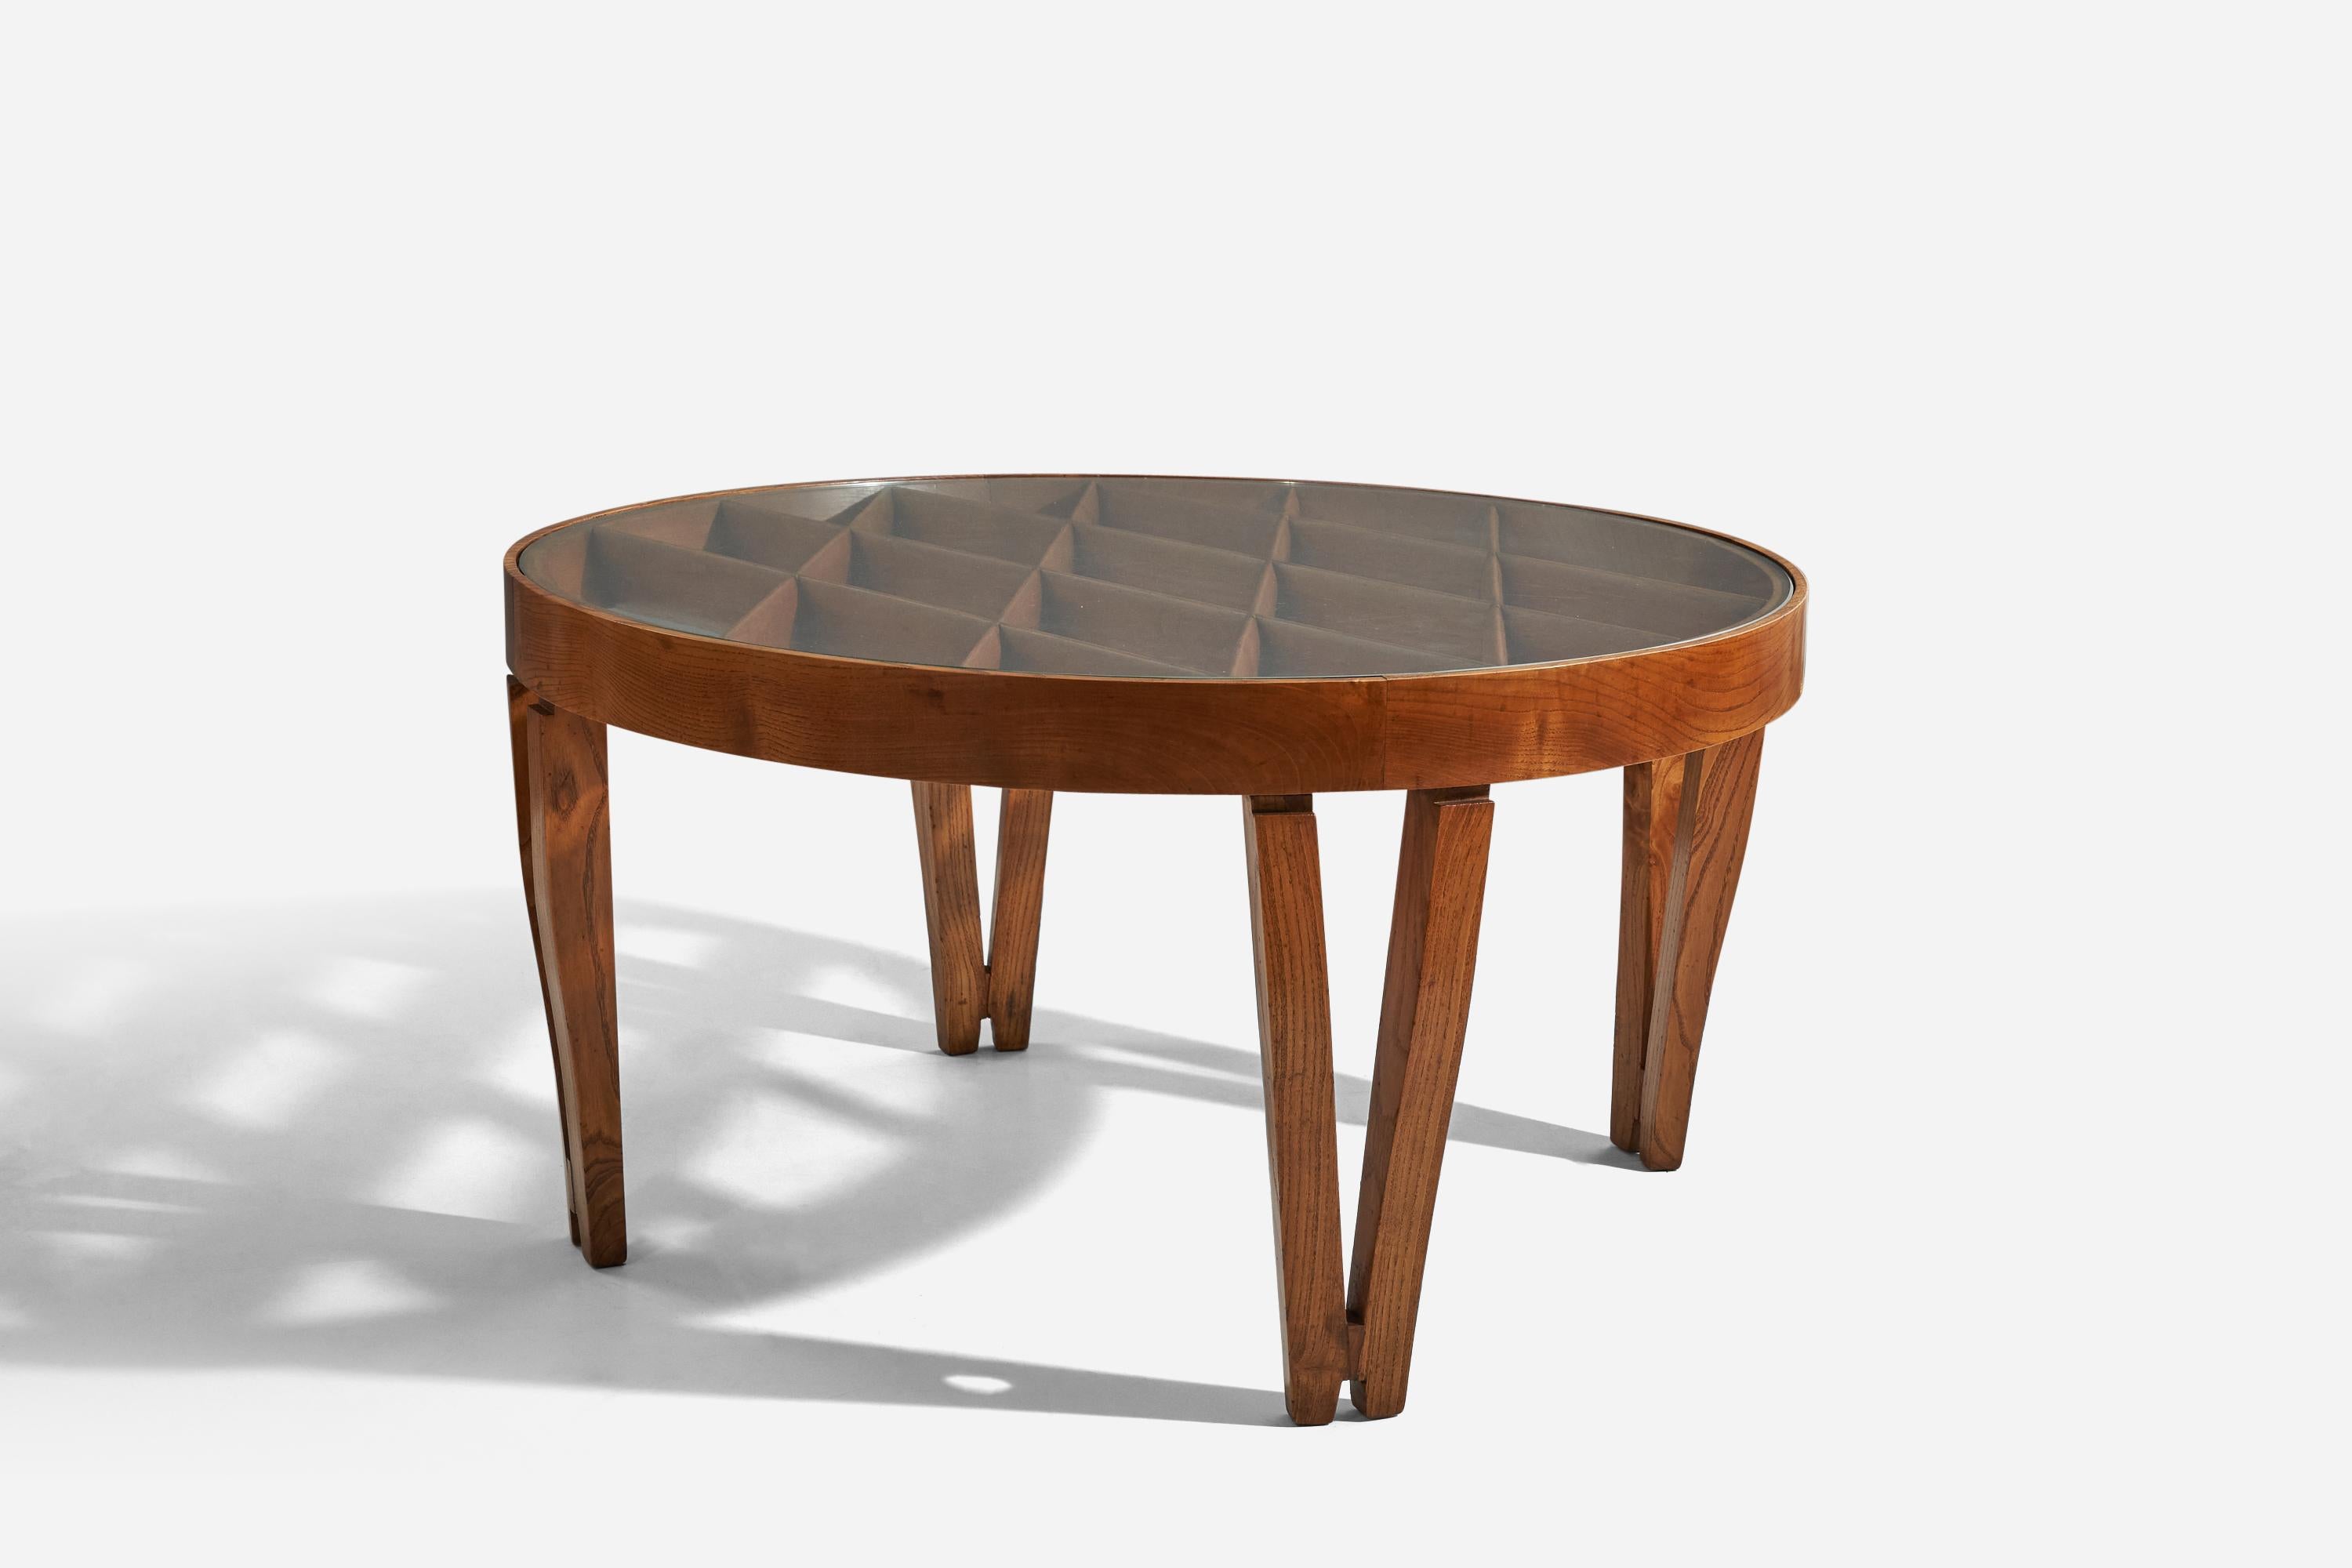 A unique, oak and glass coffee table designed by Gio Ponti and possibly executed by Giordano Chiesa, Milan, Italy, circa 1937. 

Sold with a certificate of expertise from the Gio Ponti Archives.